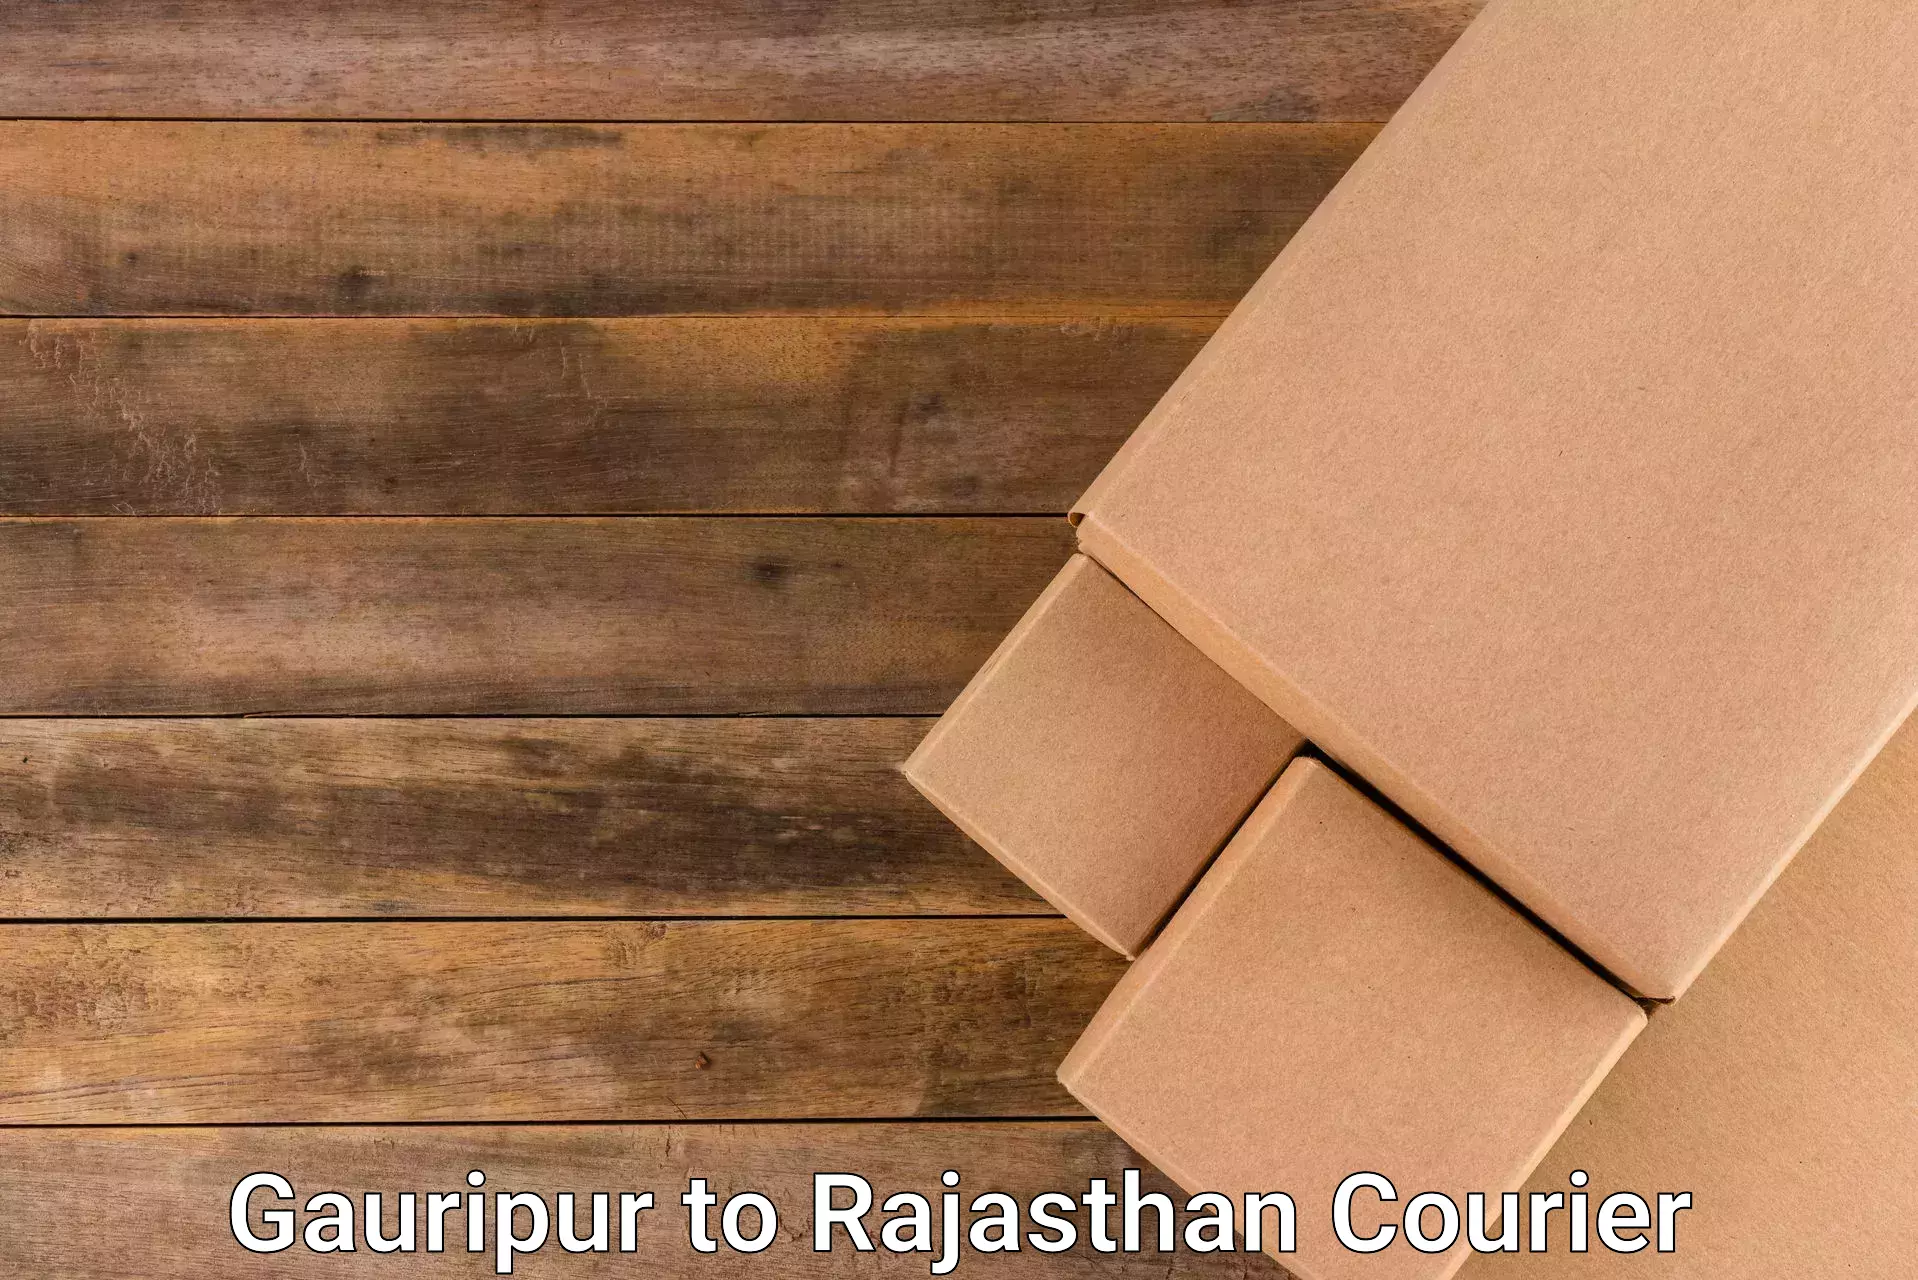 Doorstep delivery service Gauripur to Rajasthan